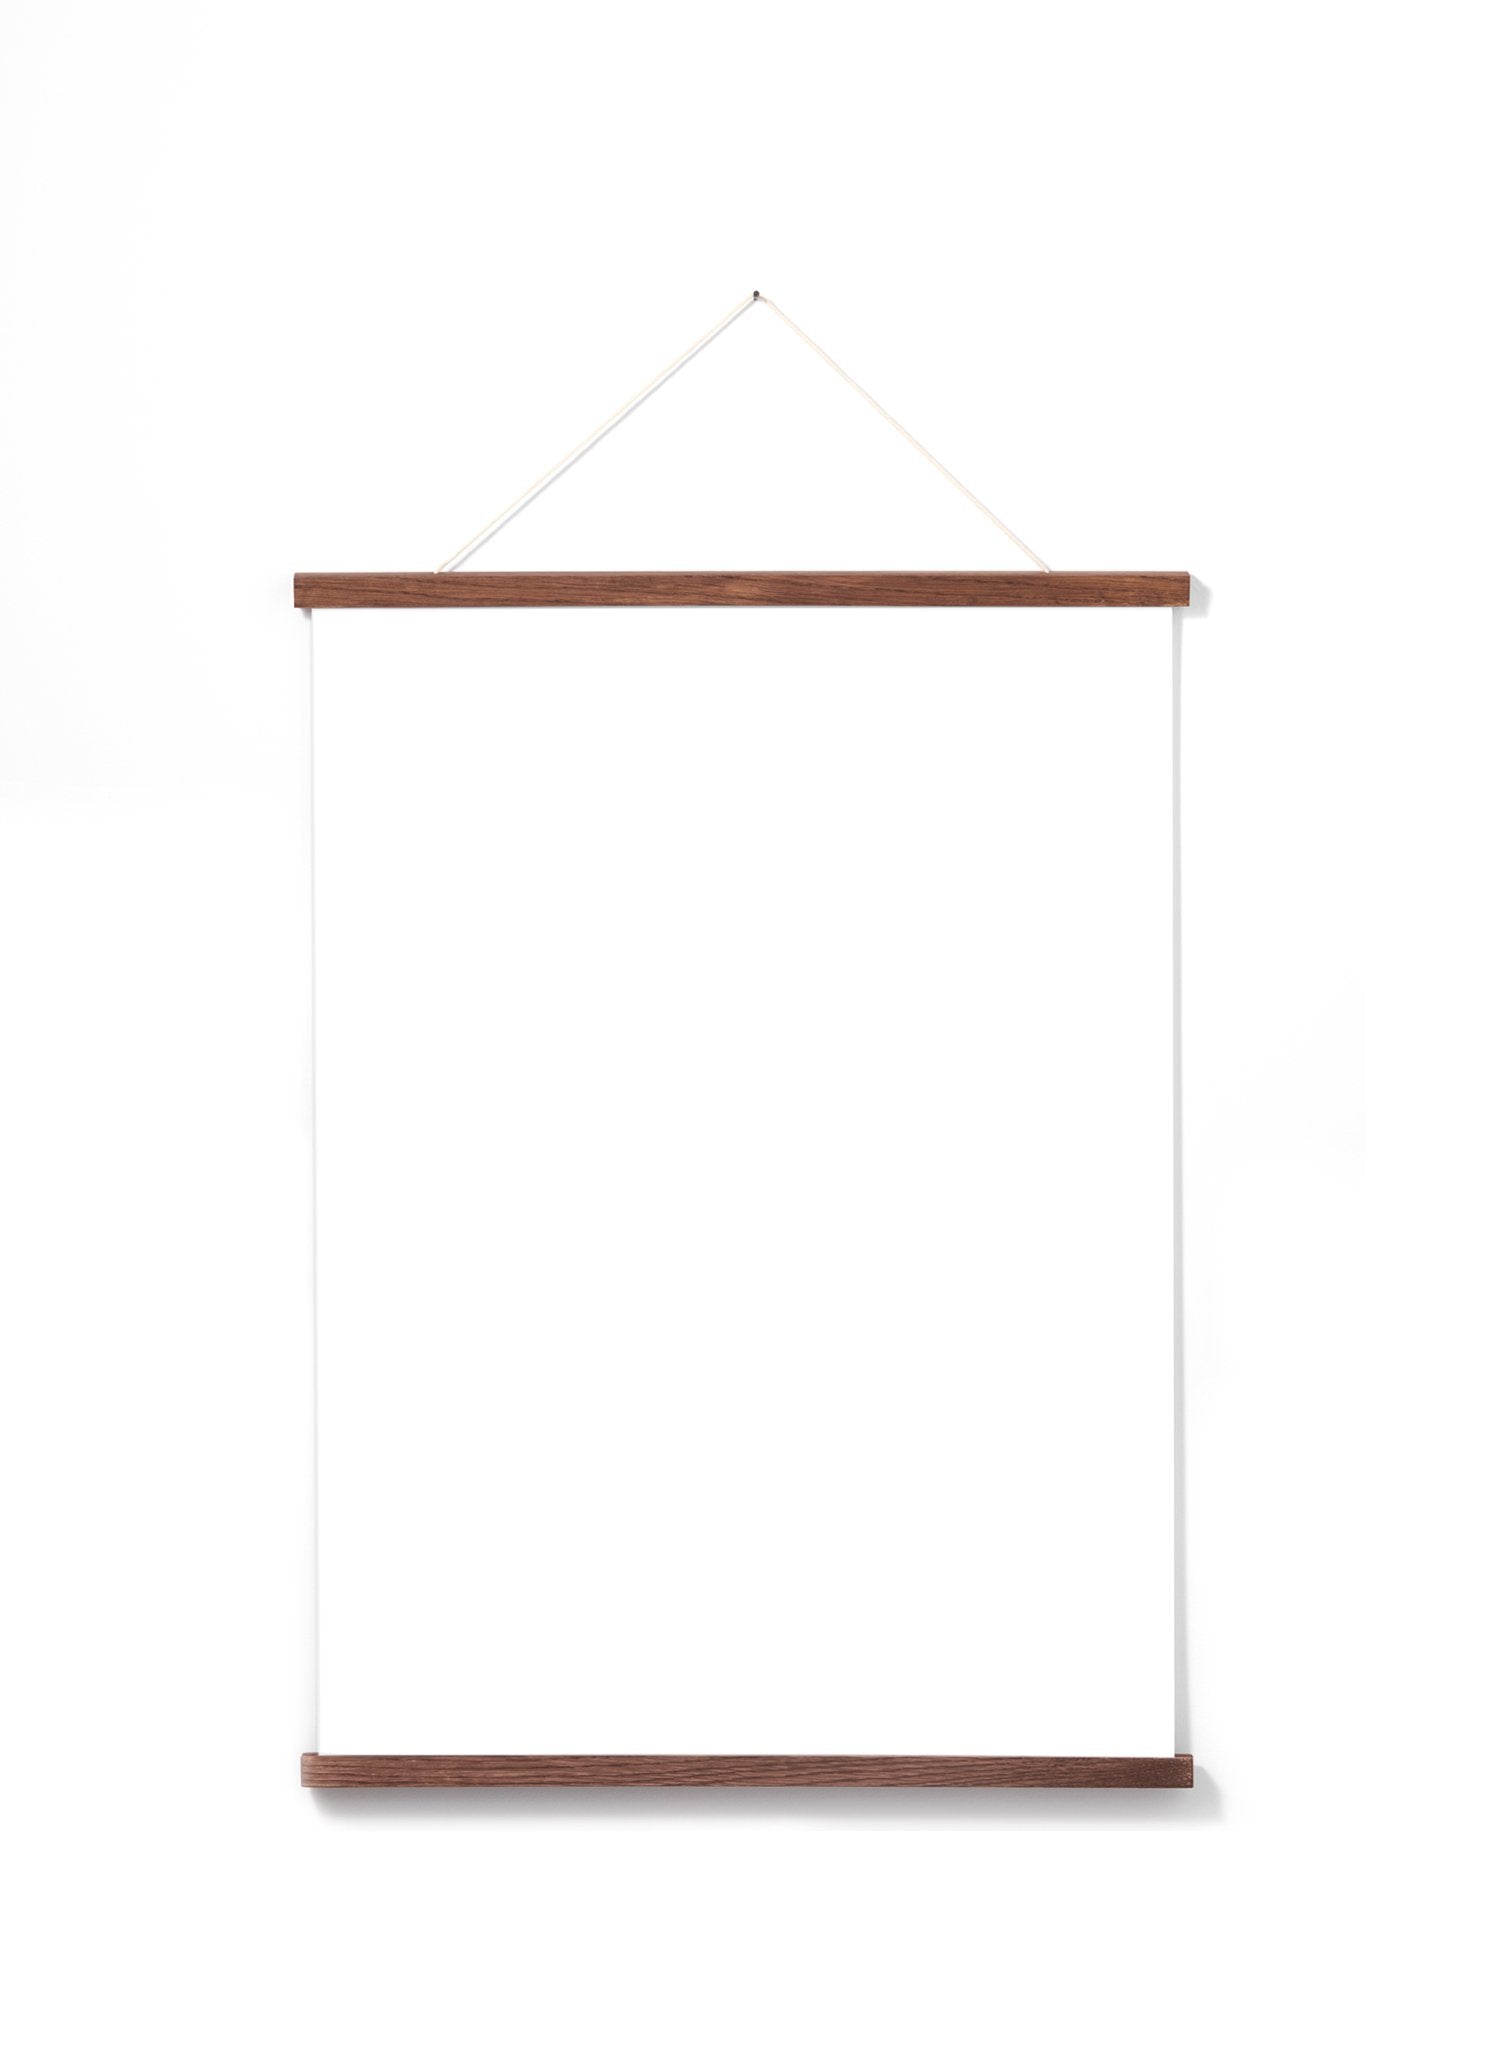 Scandinavian dark oak poster wall hanger by Opposite Wall - Front of the poster hanger - Size 20 inches